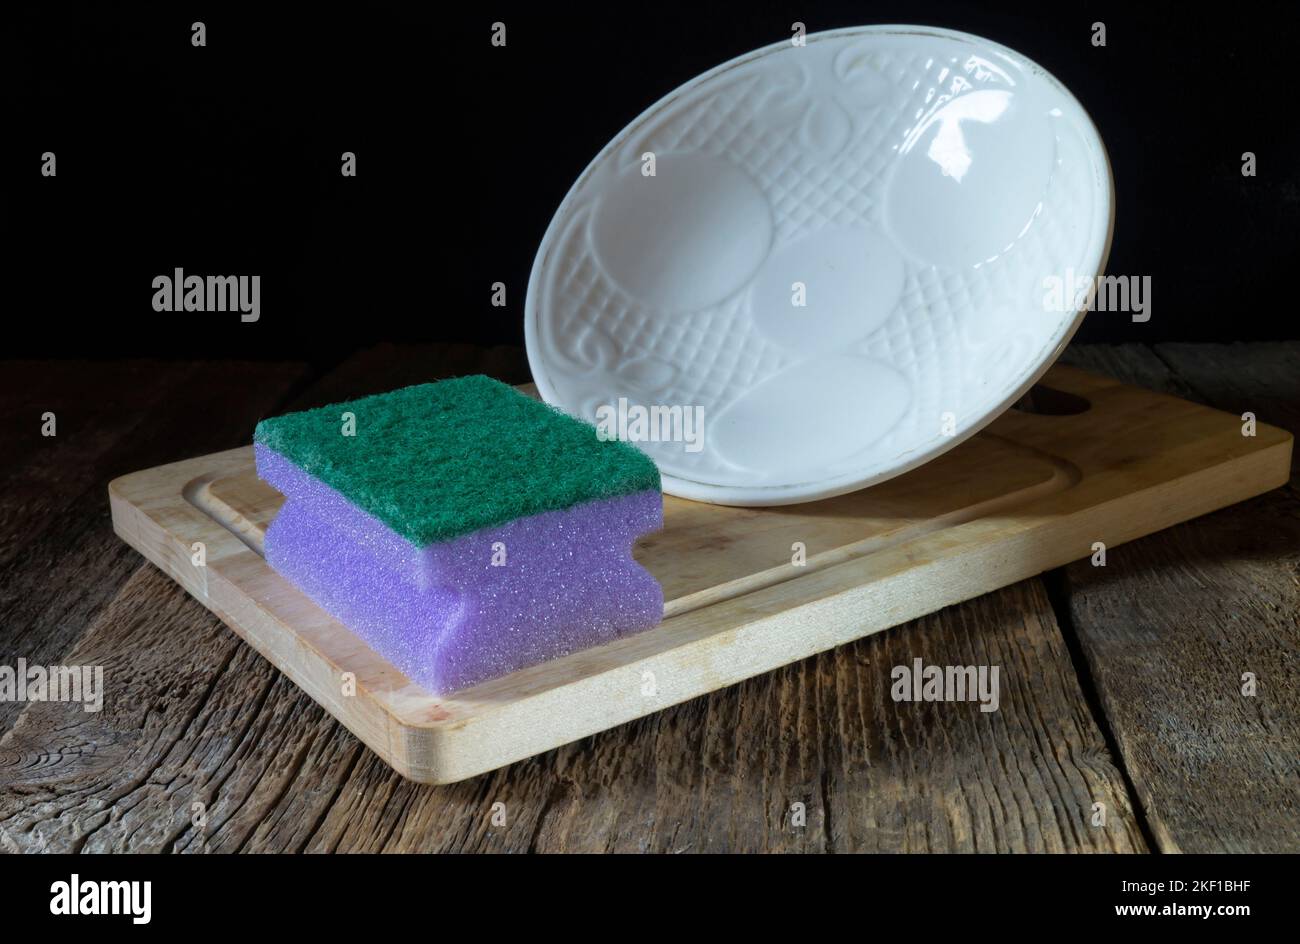 A dish washing sponge and a white plate on the table. Kitchen utensils on a black background Stock Photo